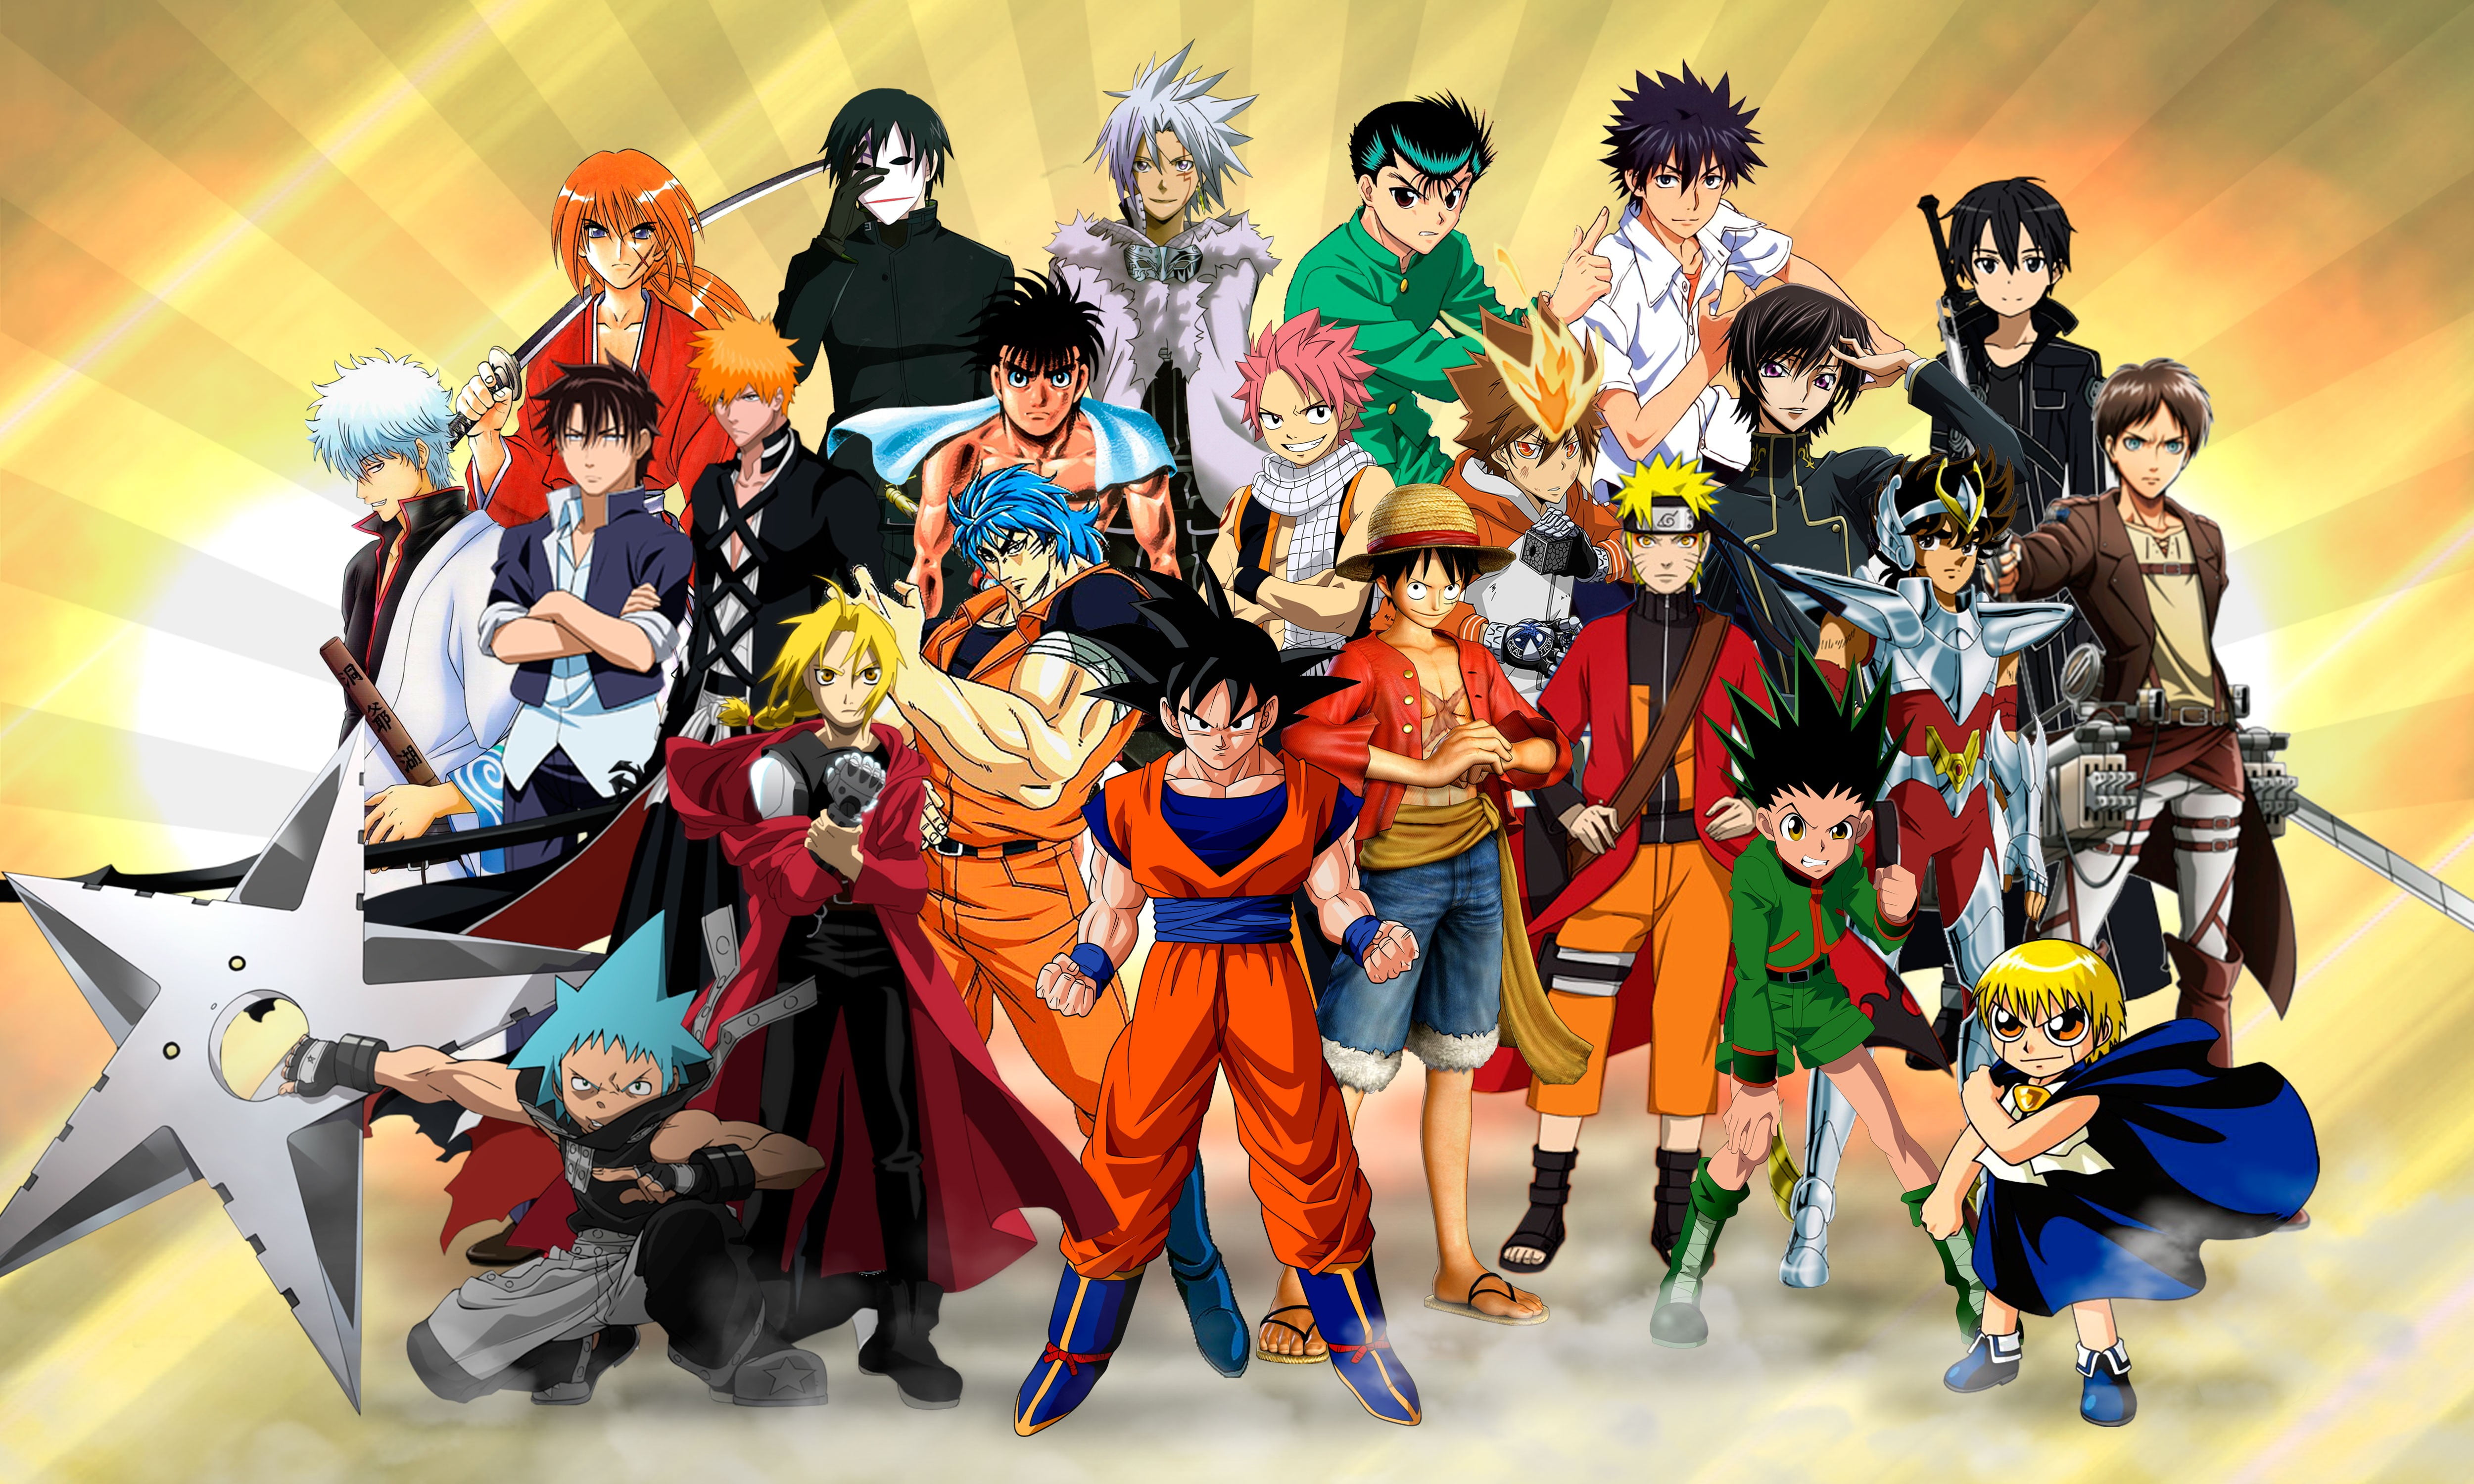 assorted anime characters illustration, anime characters 3D wallpaper